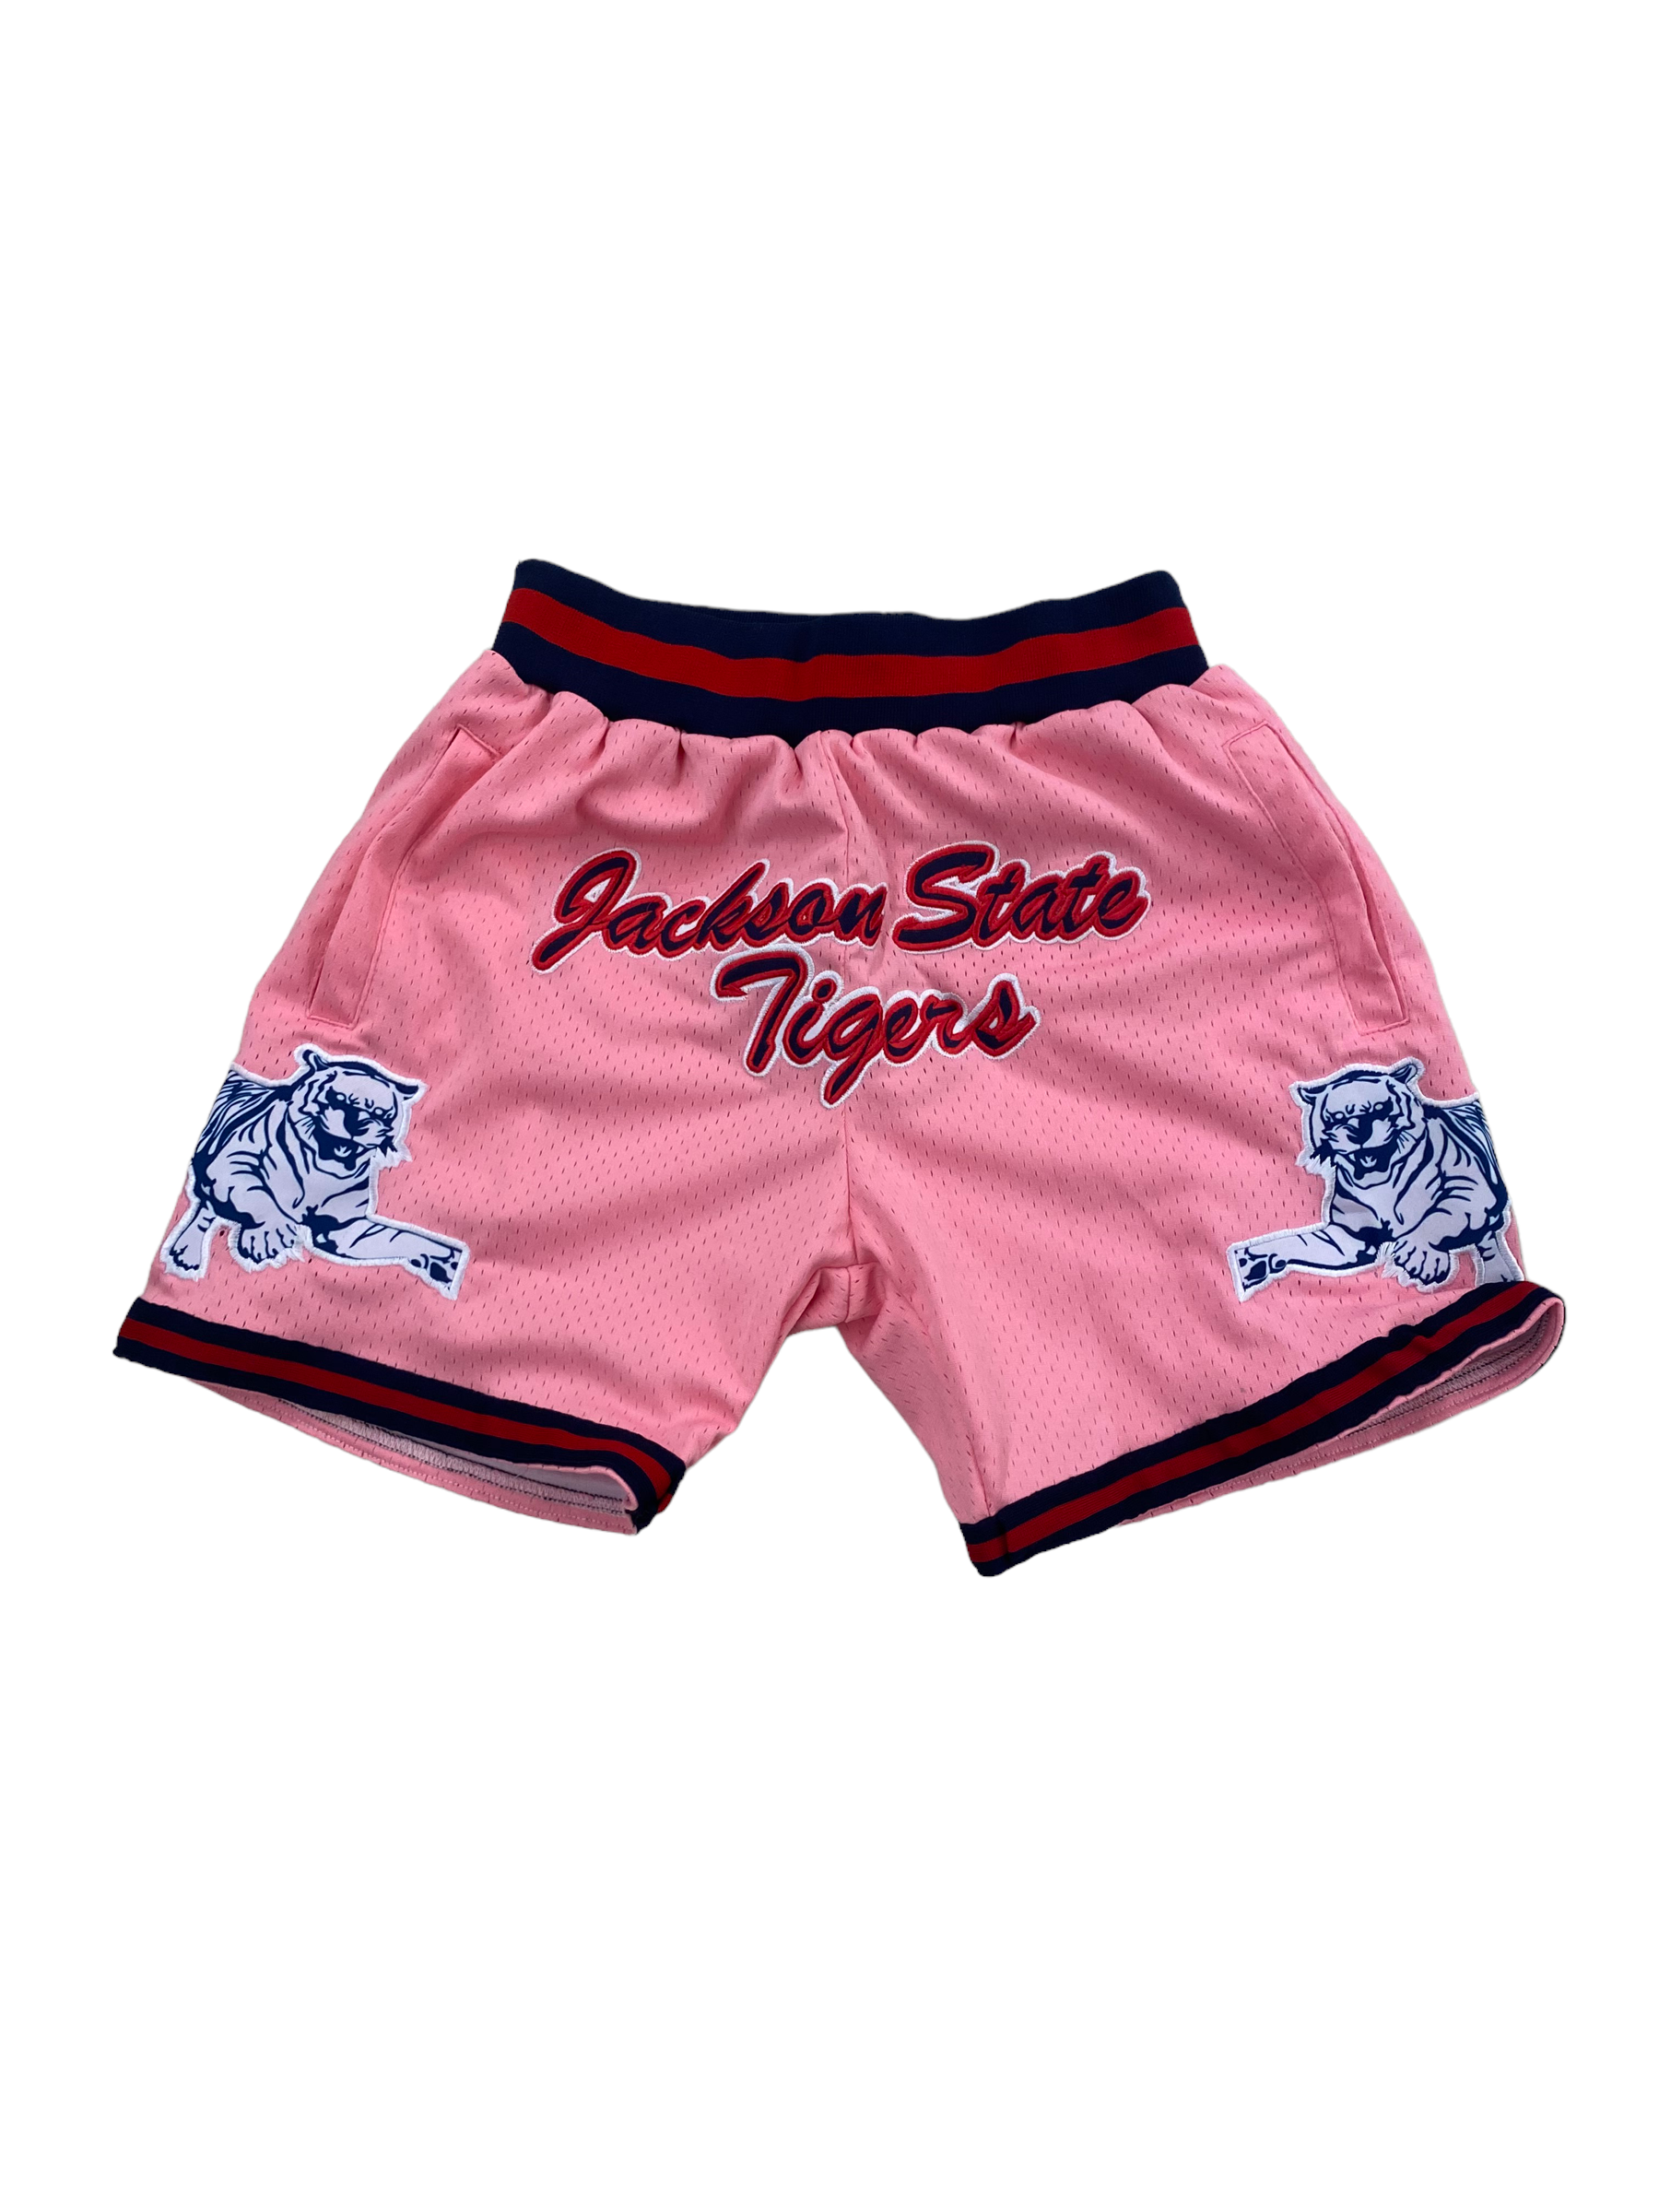 Jackson State  BASKETBALL SHORTS PINK NEW SCRIPT Hy